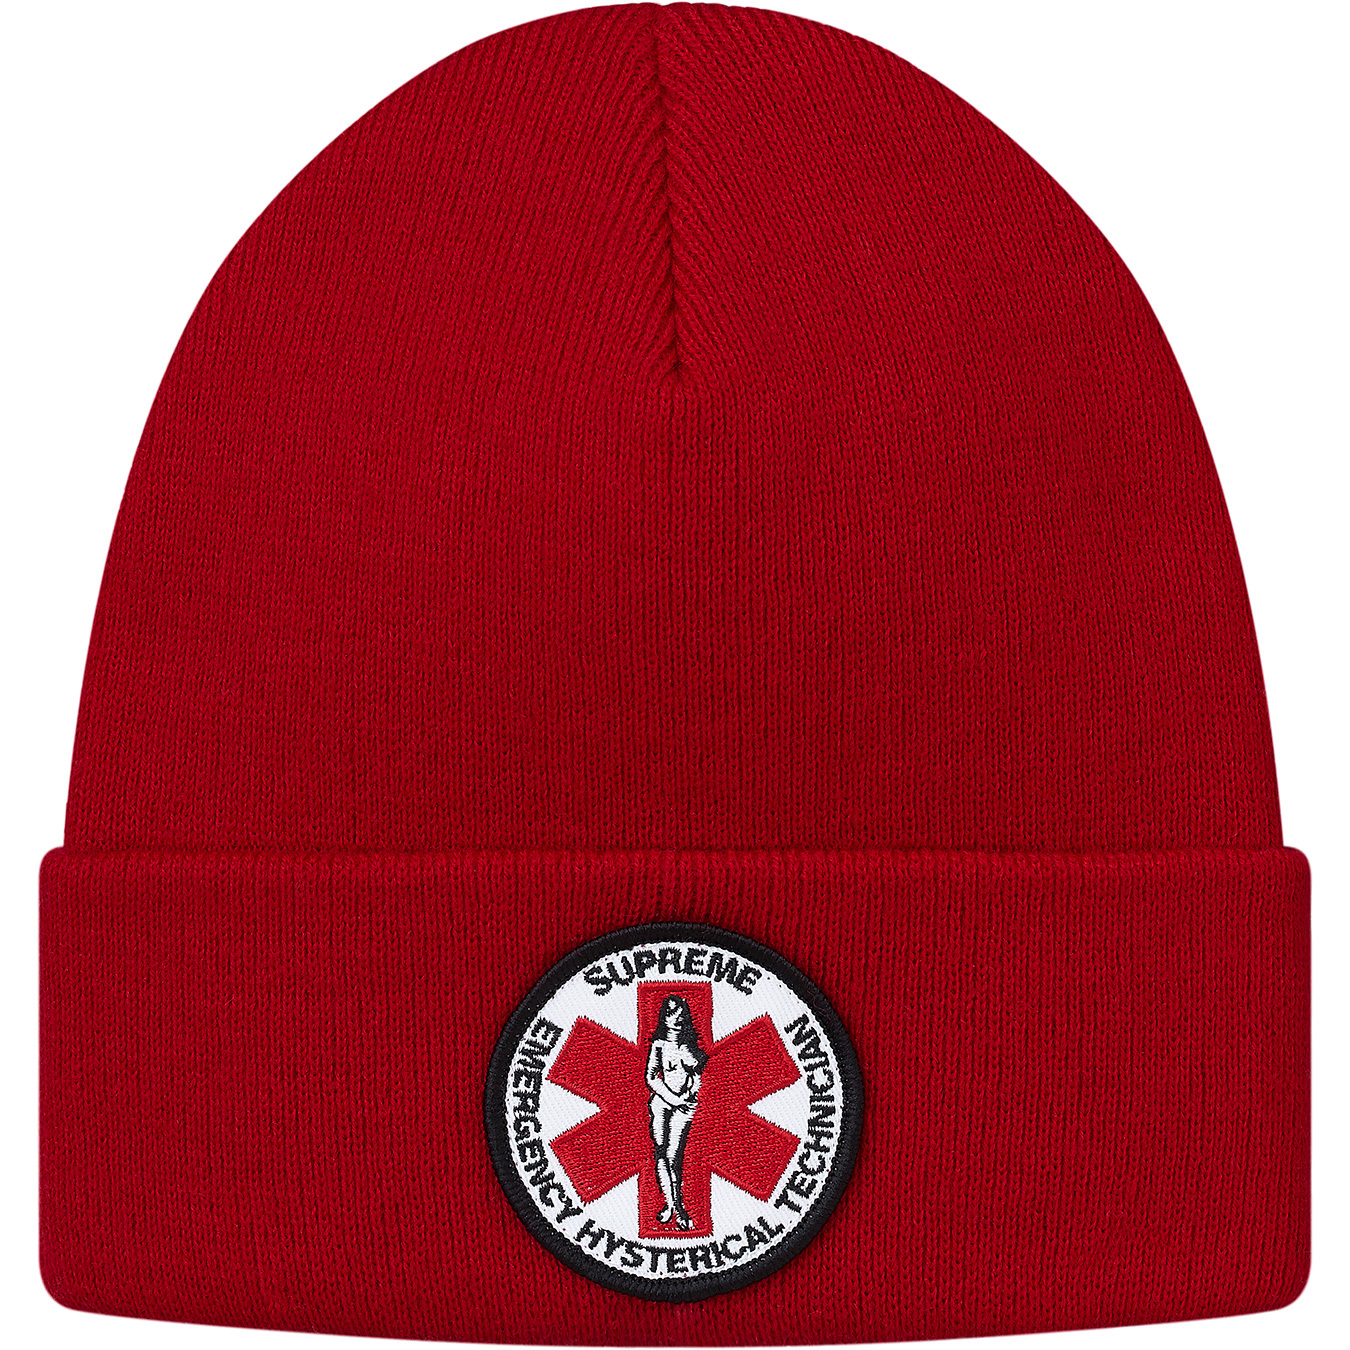 Supreme Hysteric Glamour Beanie Red - FW17 - US